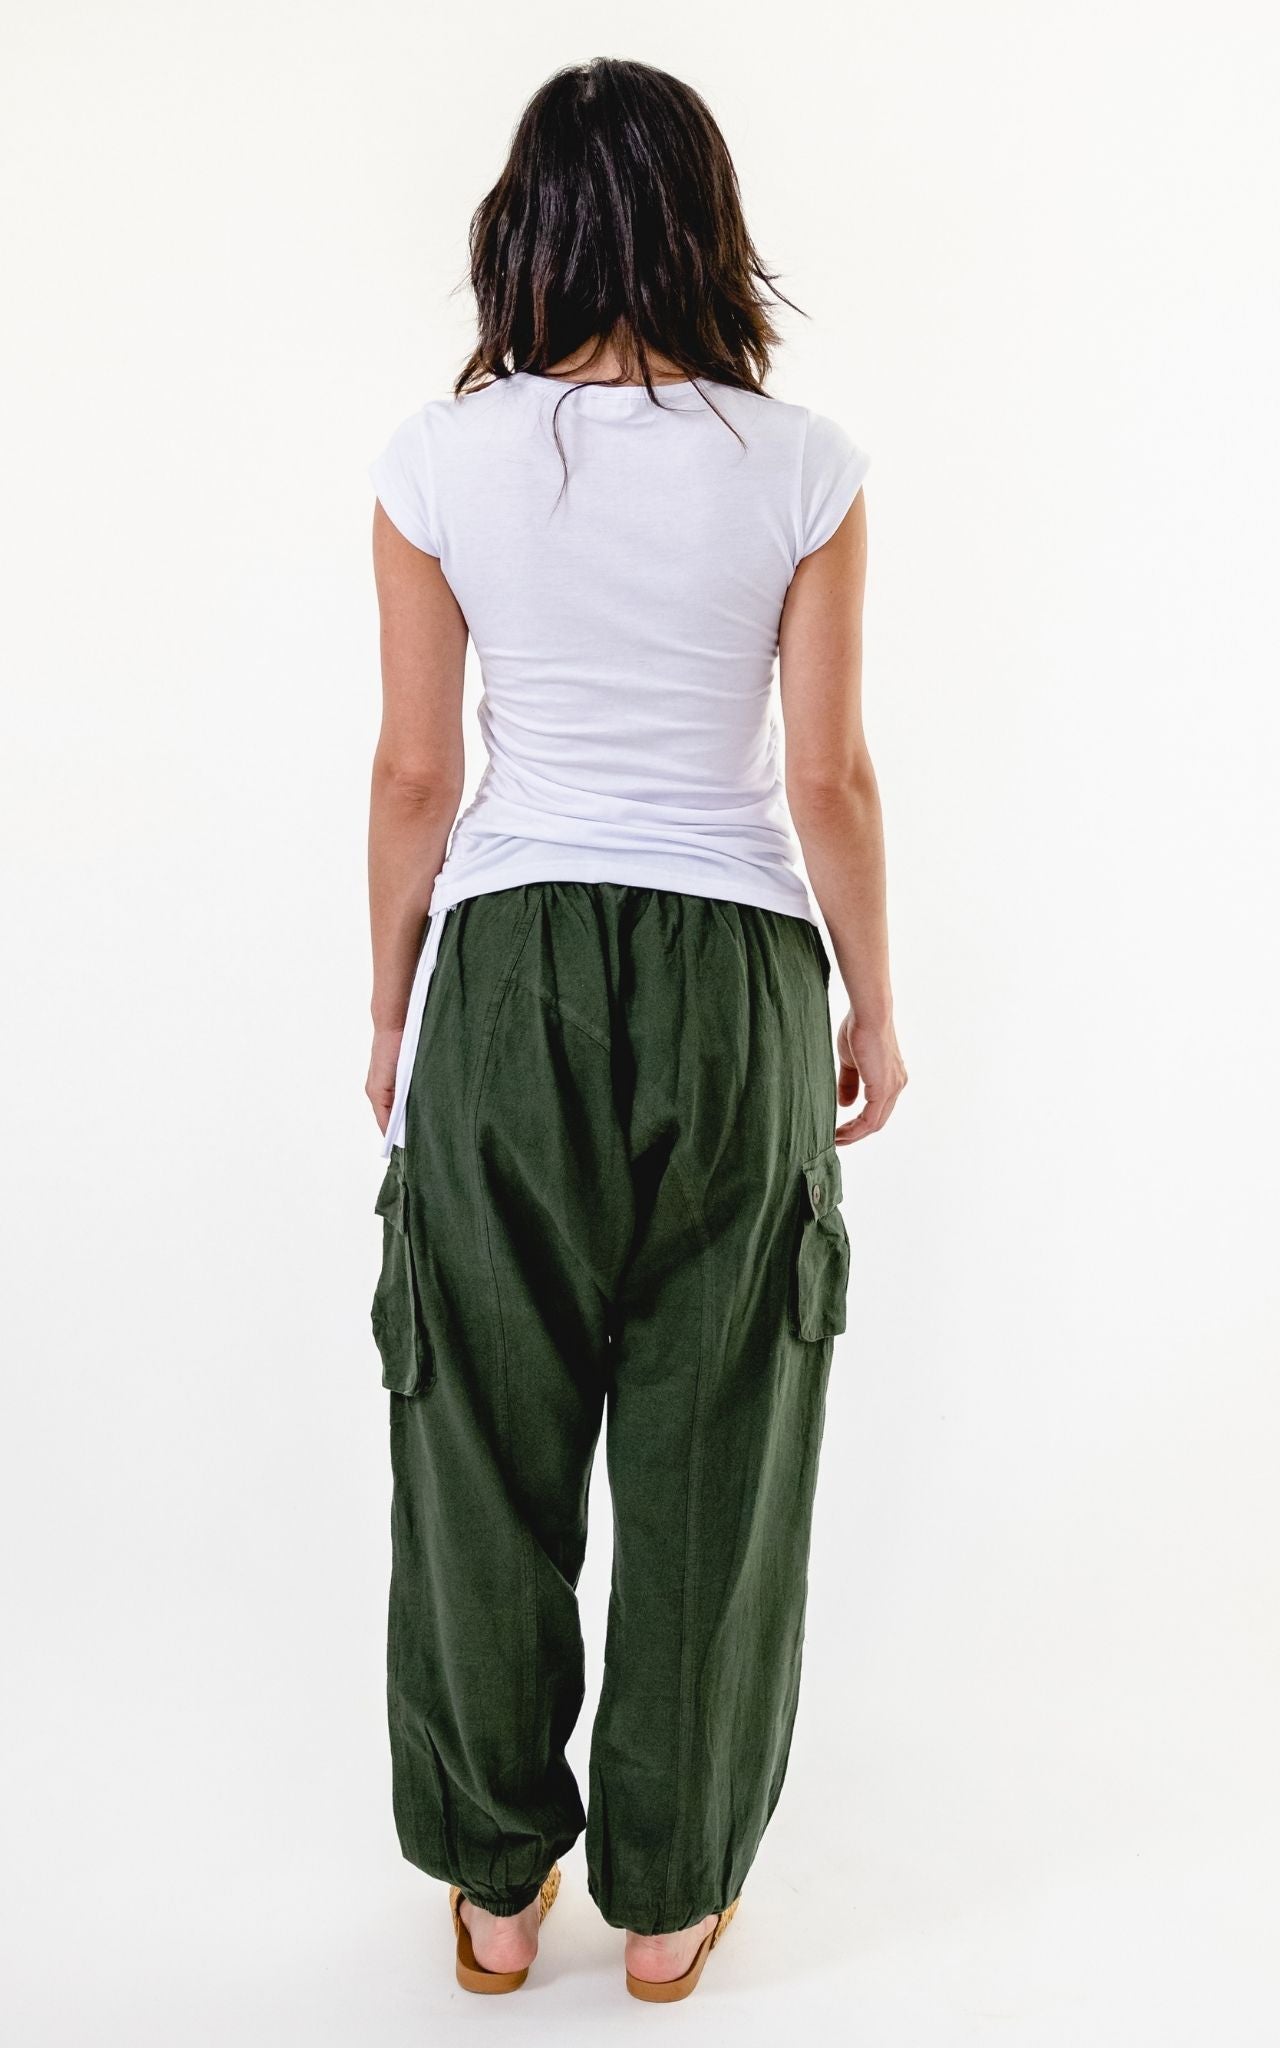 Surya Australia Ethical Drop Crotch Pants Made in Nepal - Green